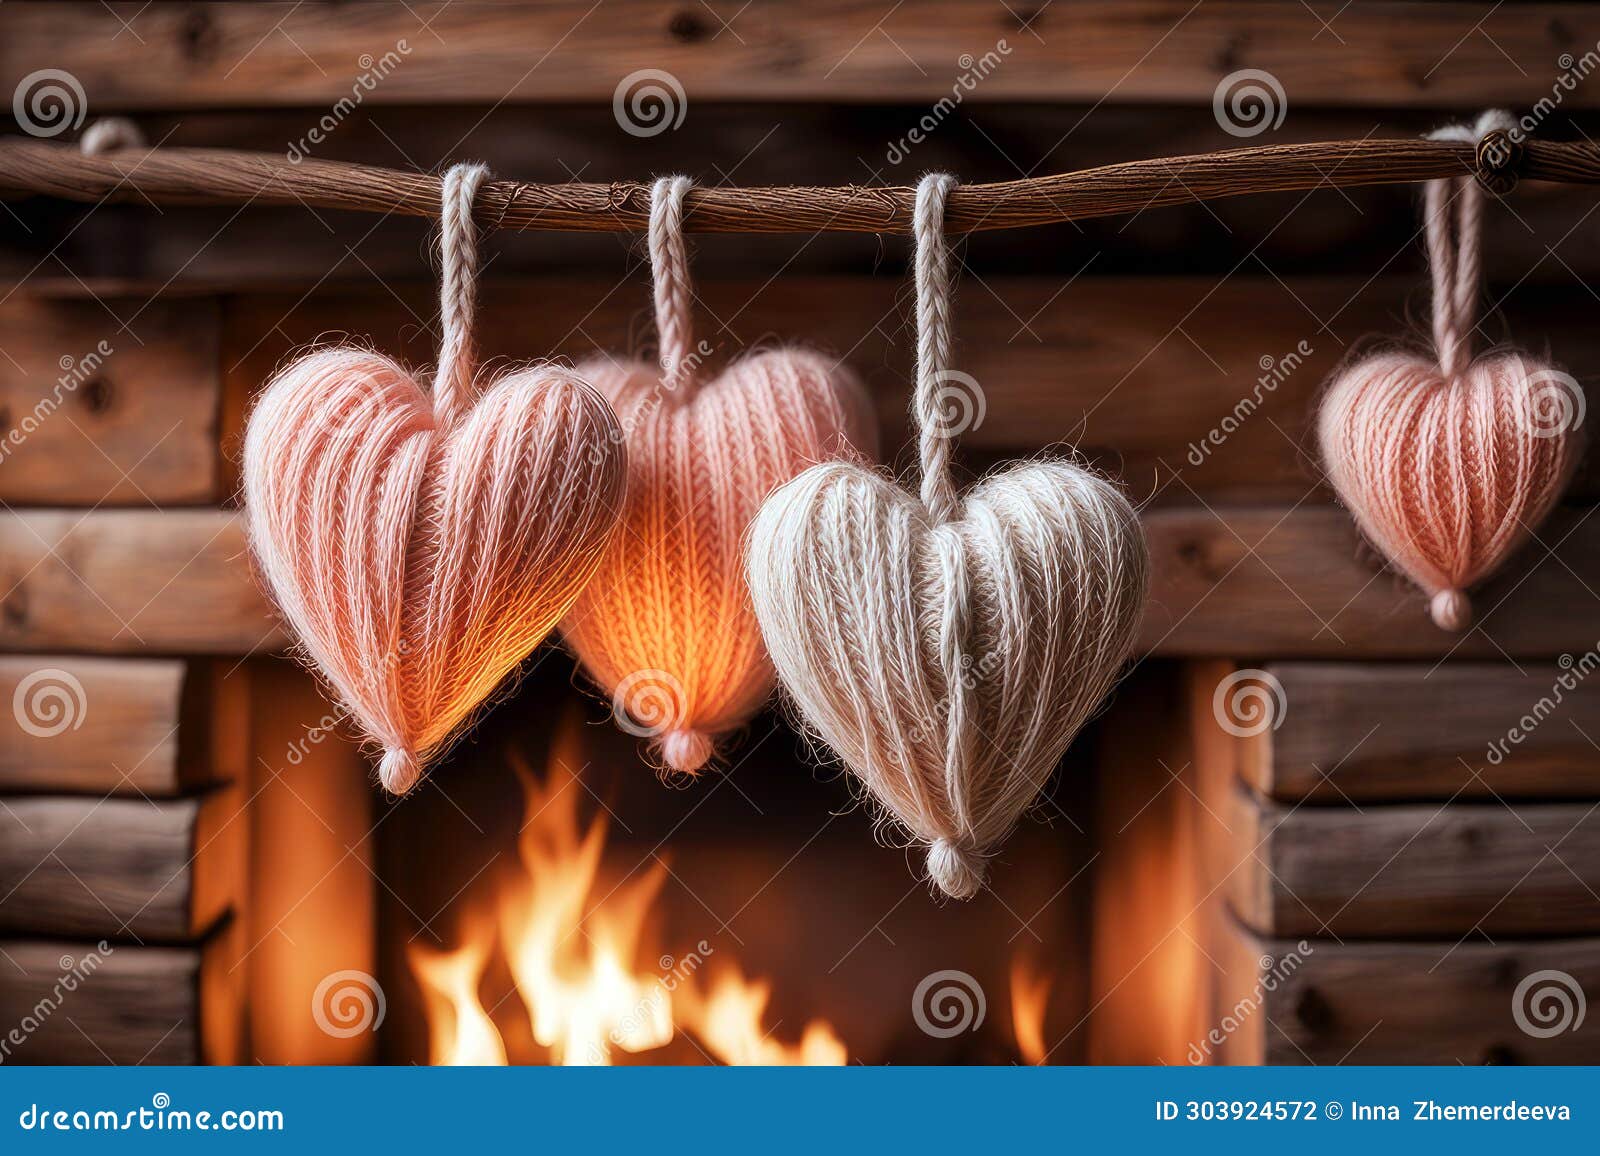 Garland of Knitted Hearts in a Cozy Rustic Interior. Background ...